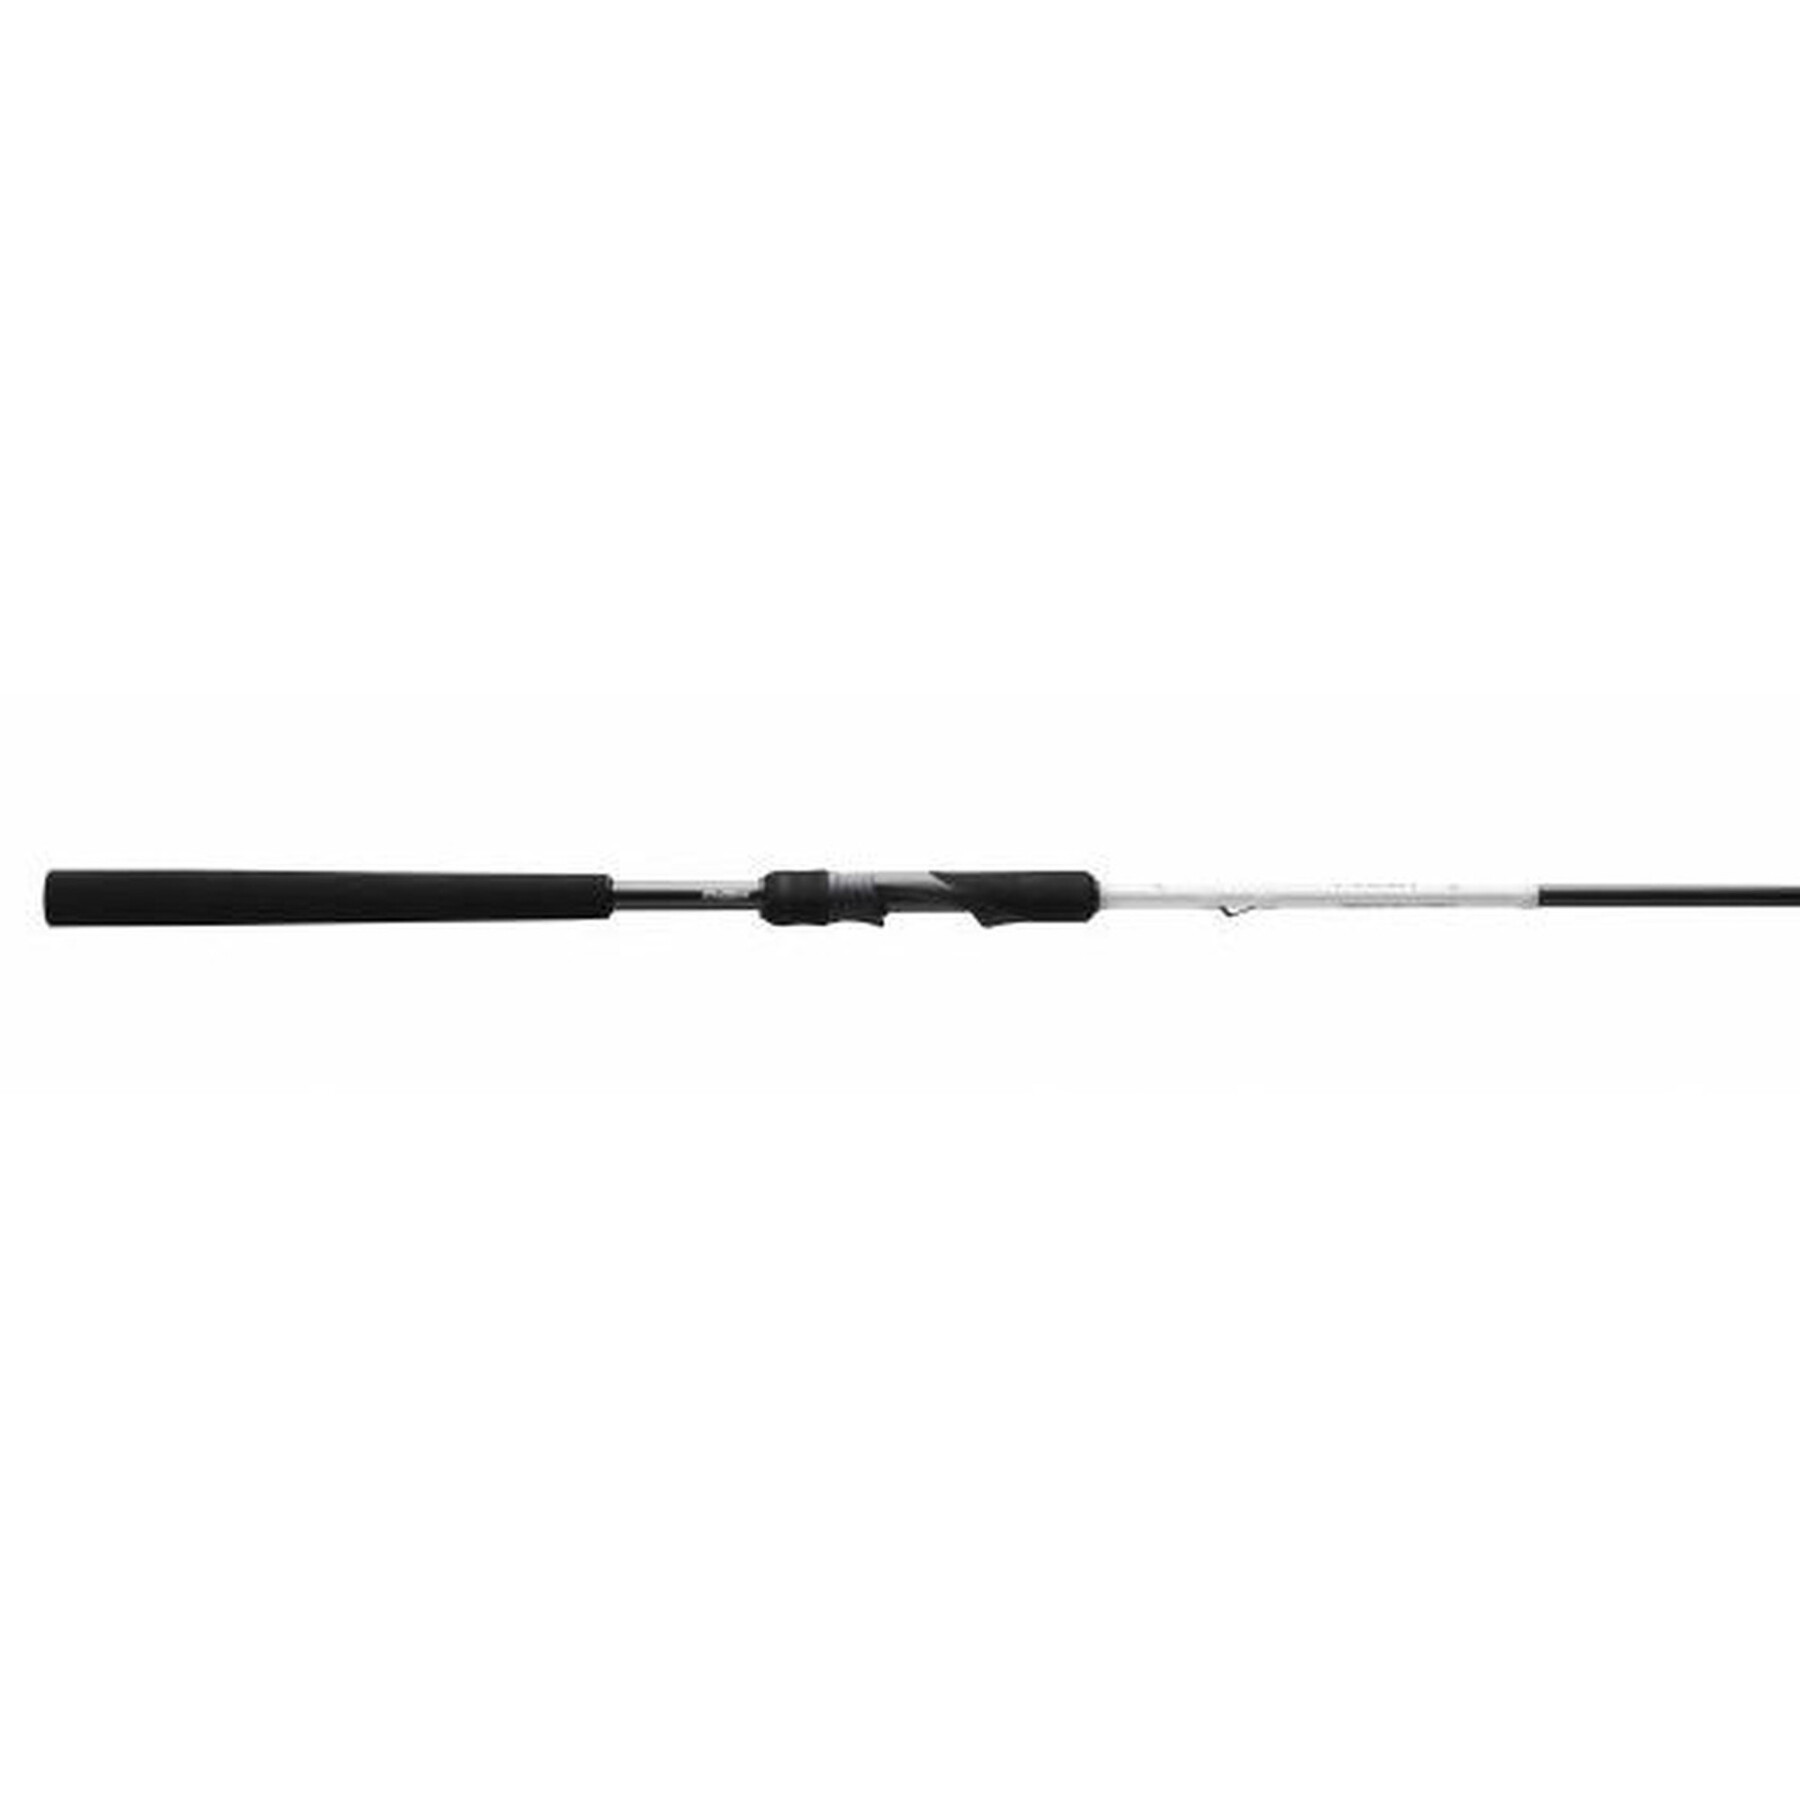 Cane 13 Fishing Rely S Spin 2,18m 15-40g